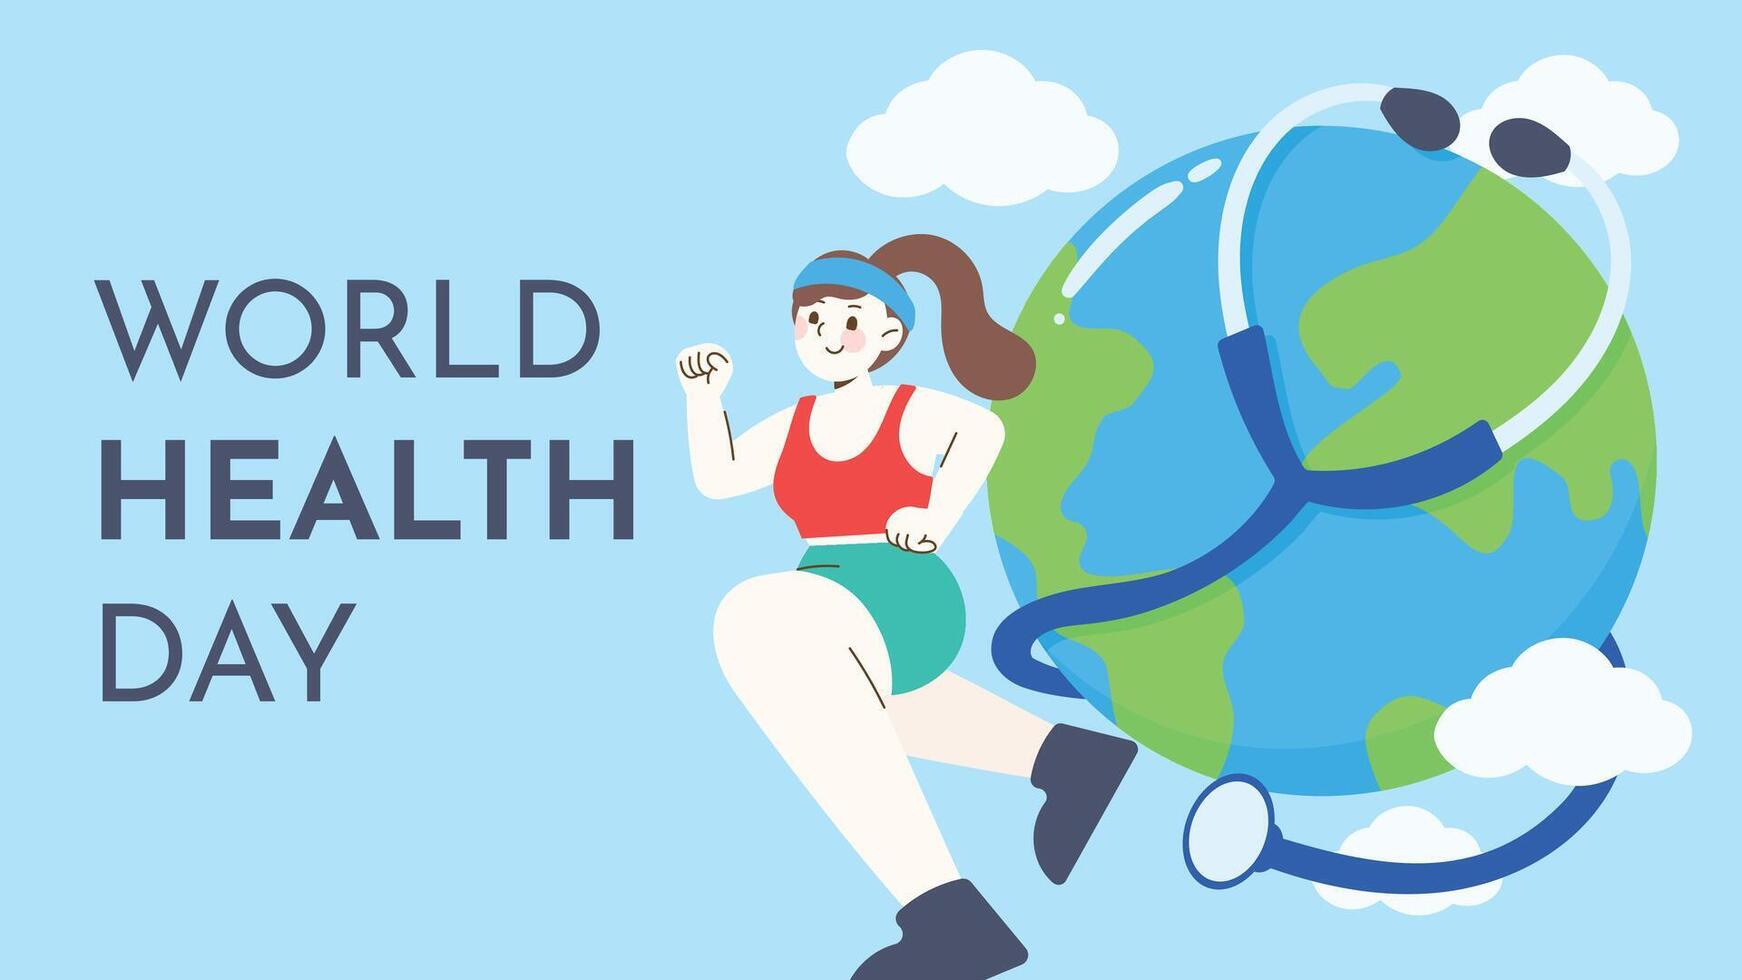 World health day concept, 7 April, background vector. Hand drawn comic doodle style of people working out, exercise, earth, stethoscope. Design for web, banner, campaign, social media post. vector